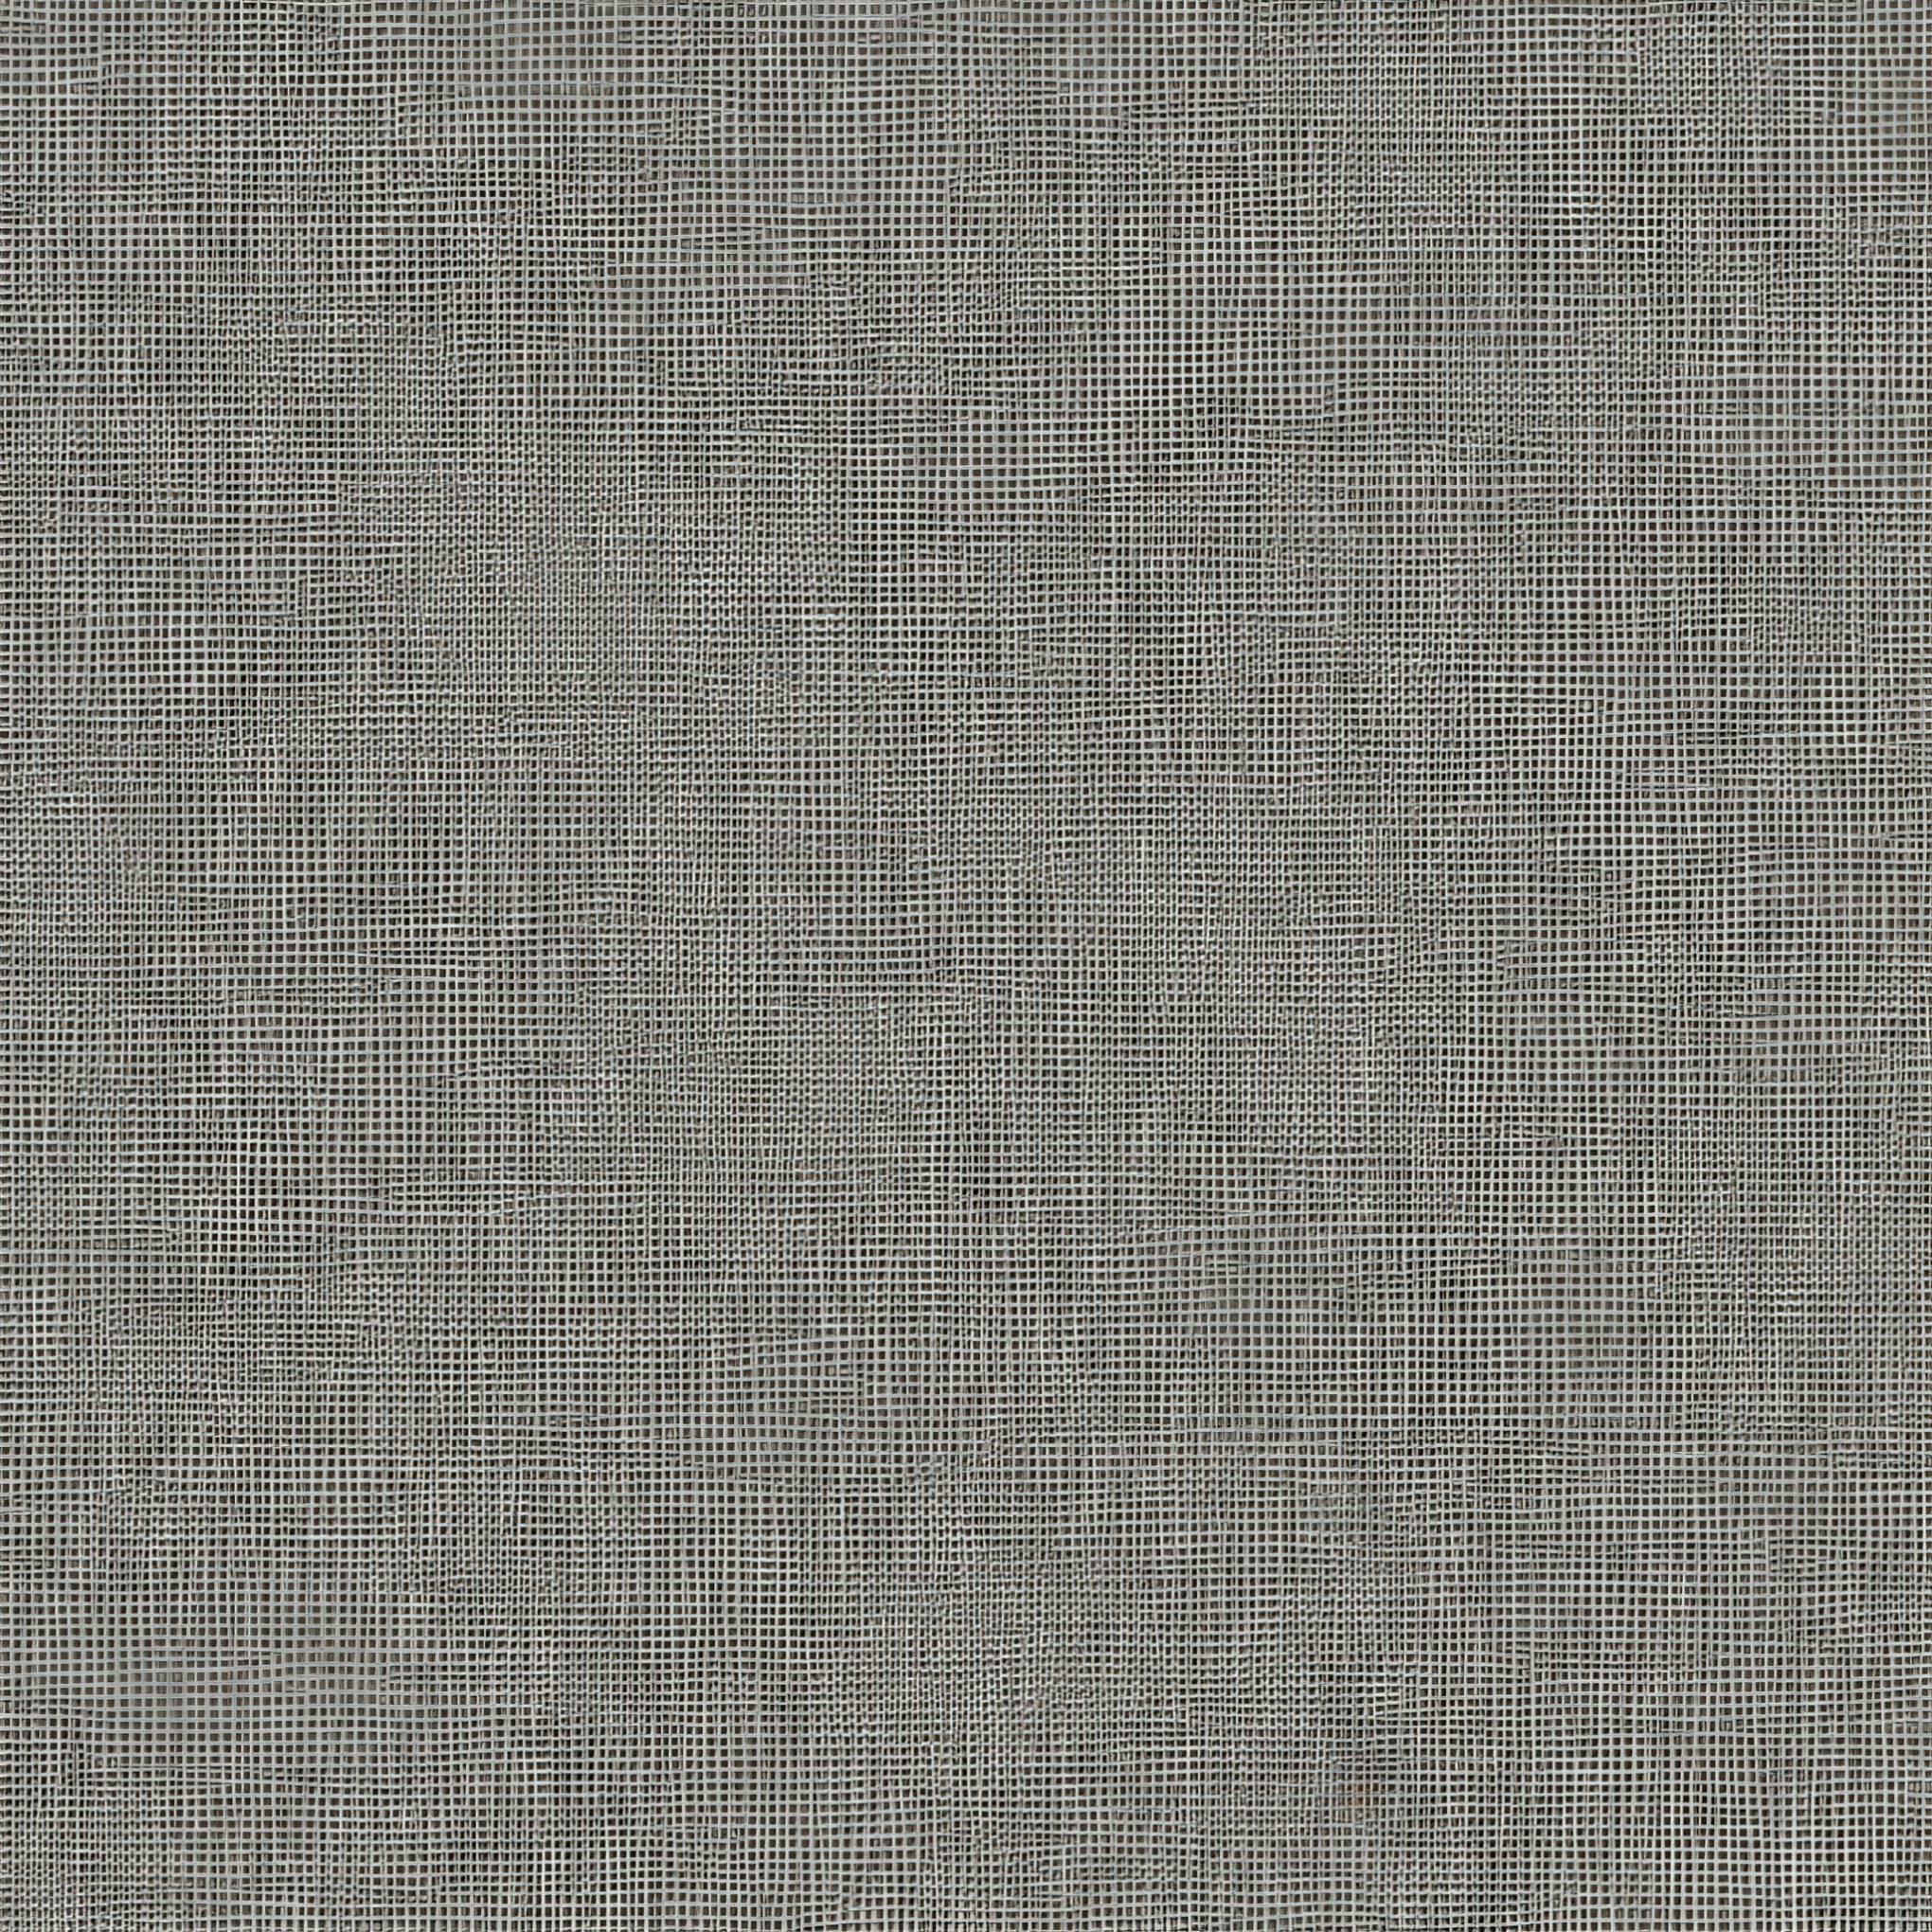 Grey Fabric Material Background Texture Tile Free Picture Download